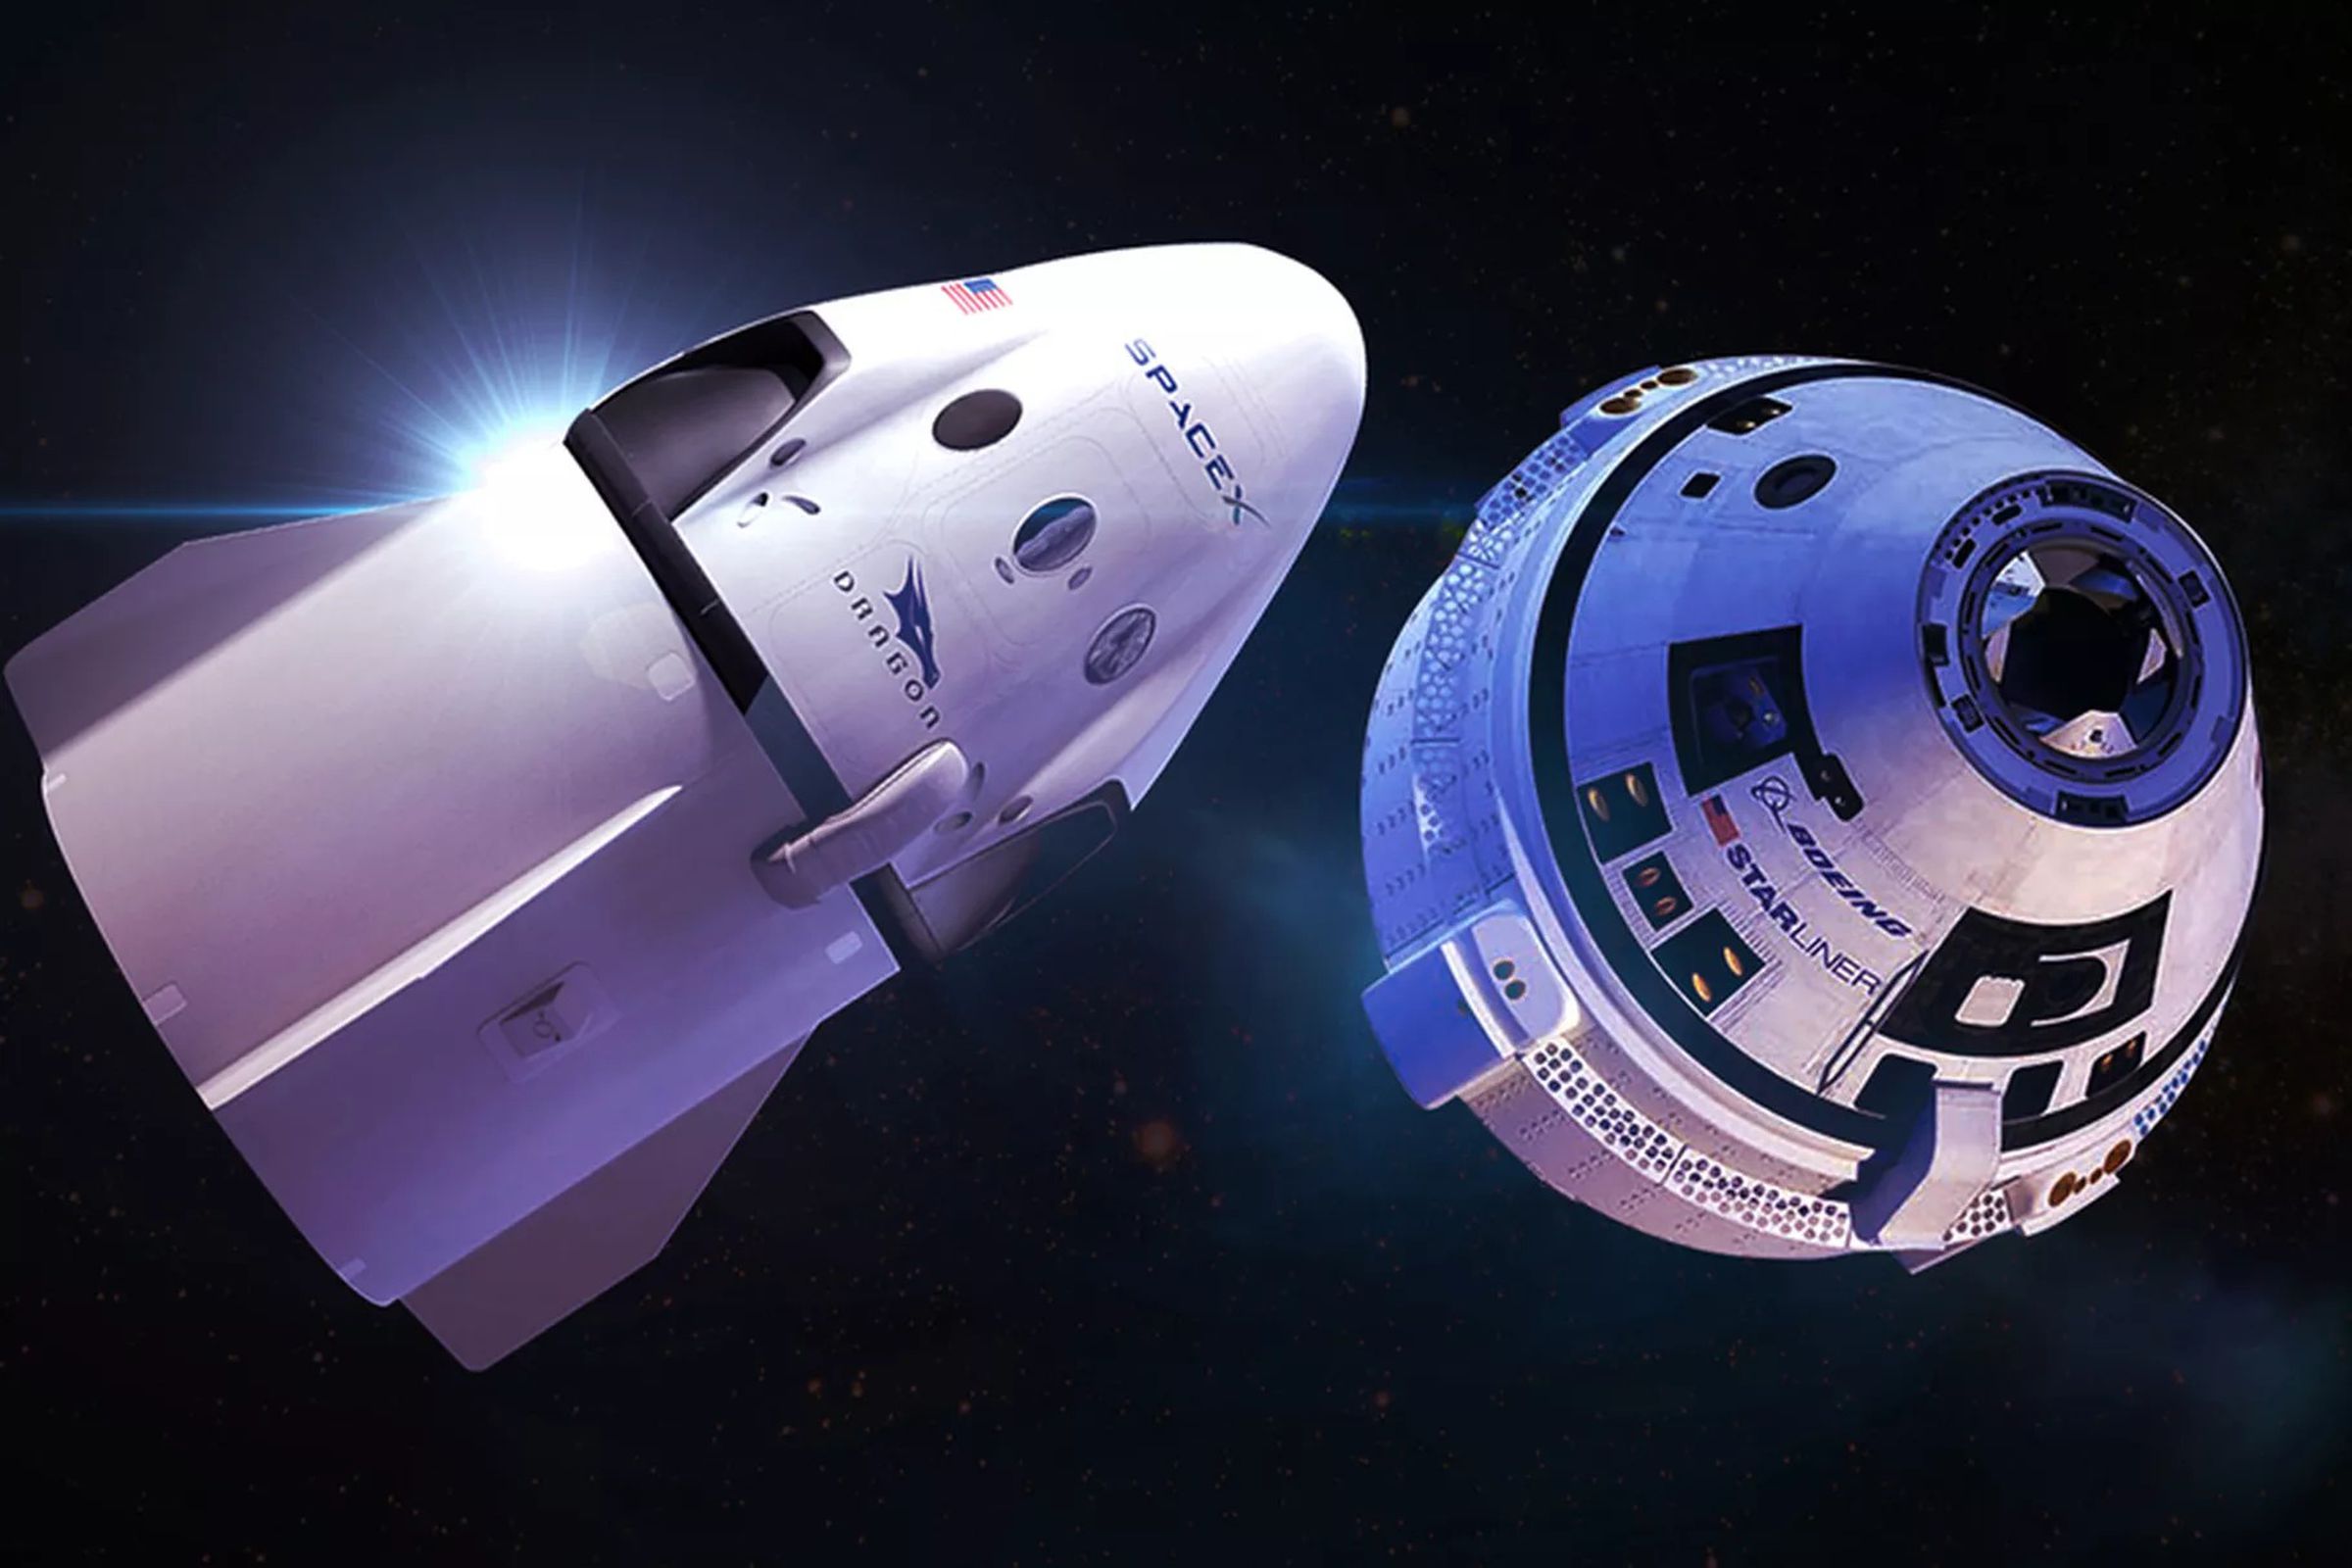 Artistic renderings of SpaceX’s Crew Dragon (L) and Boeing’s CST-100 Starliner (R).